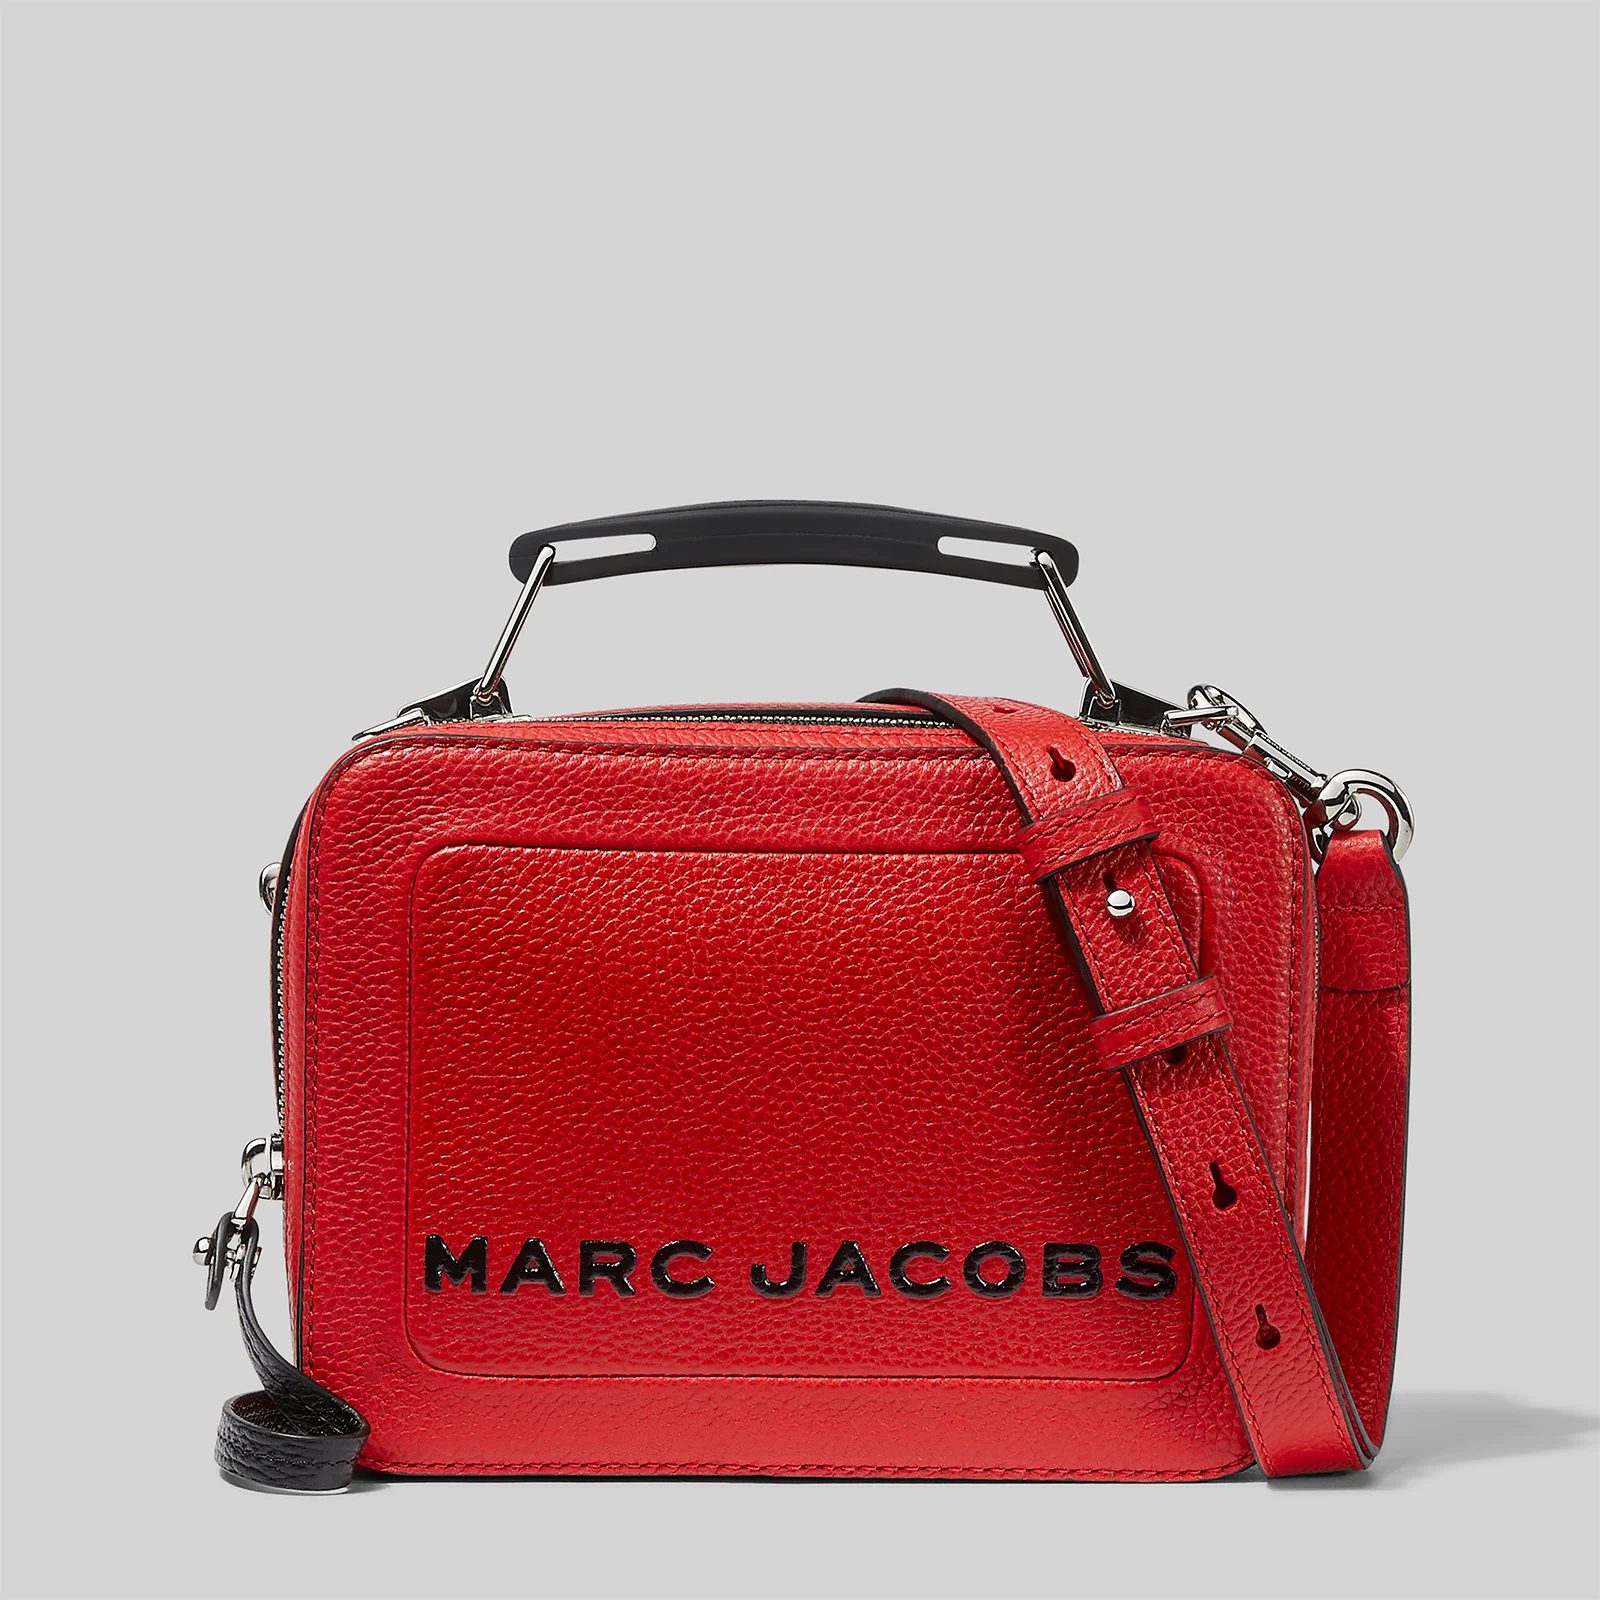 Marc Jacobs Women's The Box 20 Cross Body Bag - True Red Image 1